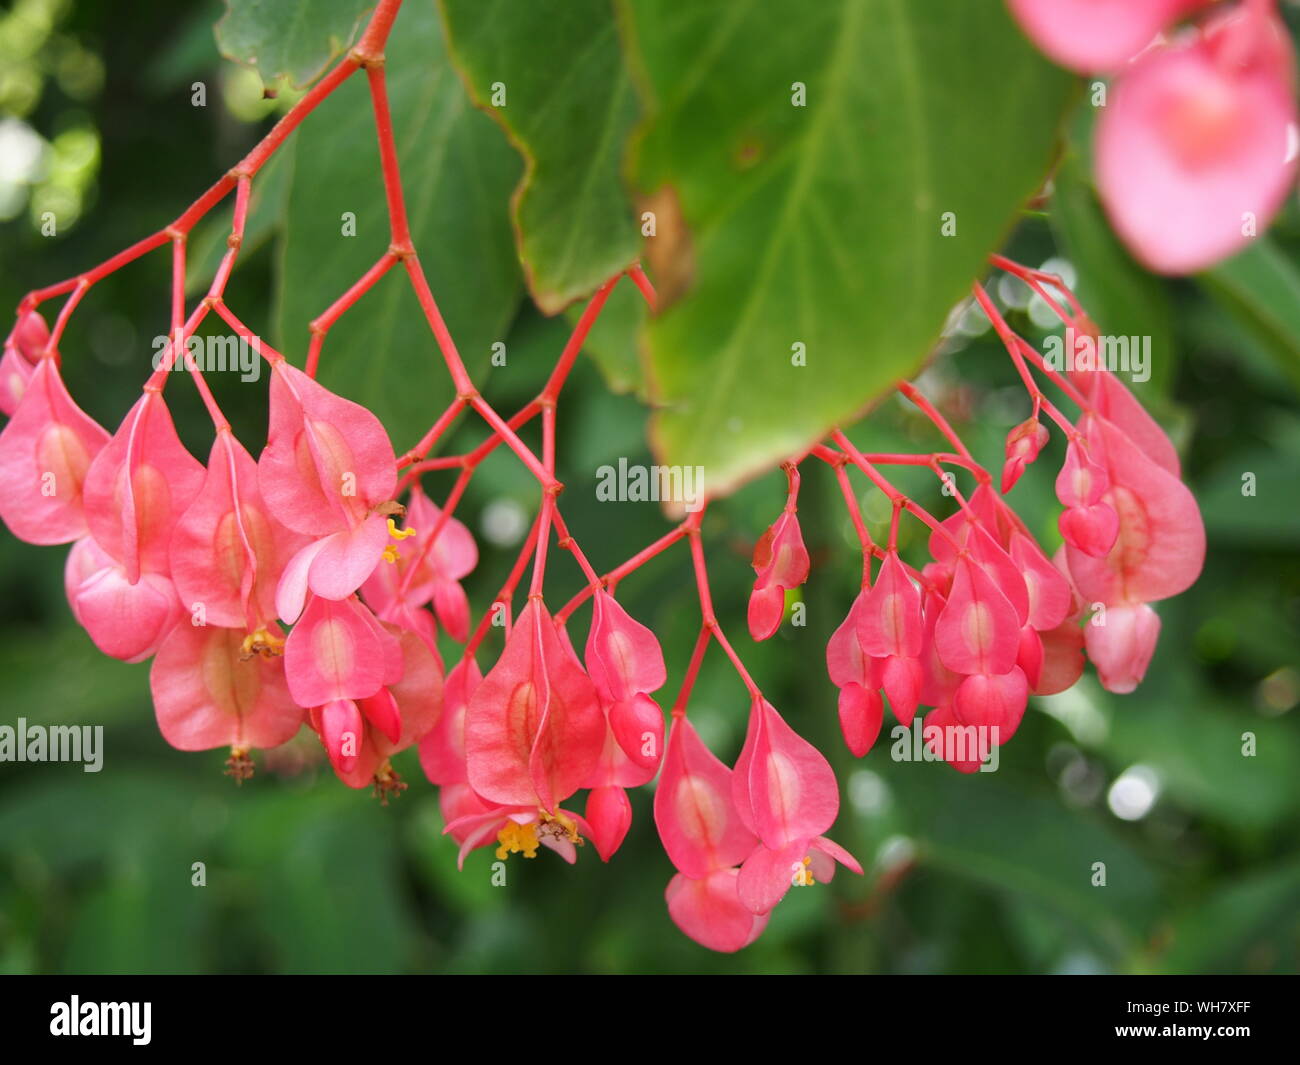 Begonia Flowers in Cluster, Sydney Royal Botanic garden, flower, pink, plant,  garden, blossom, tropical, green leaves with red edges, closed u Stock Photo